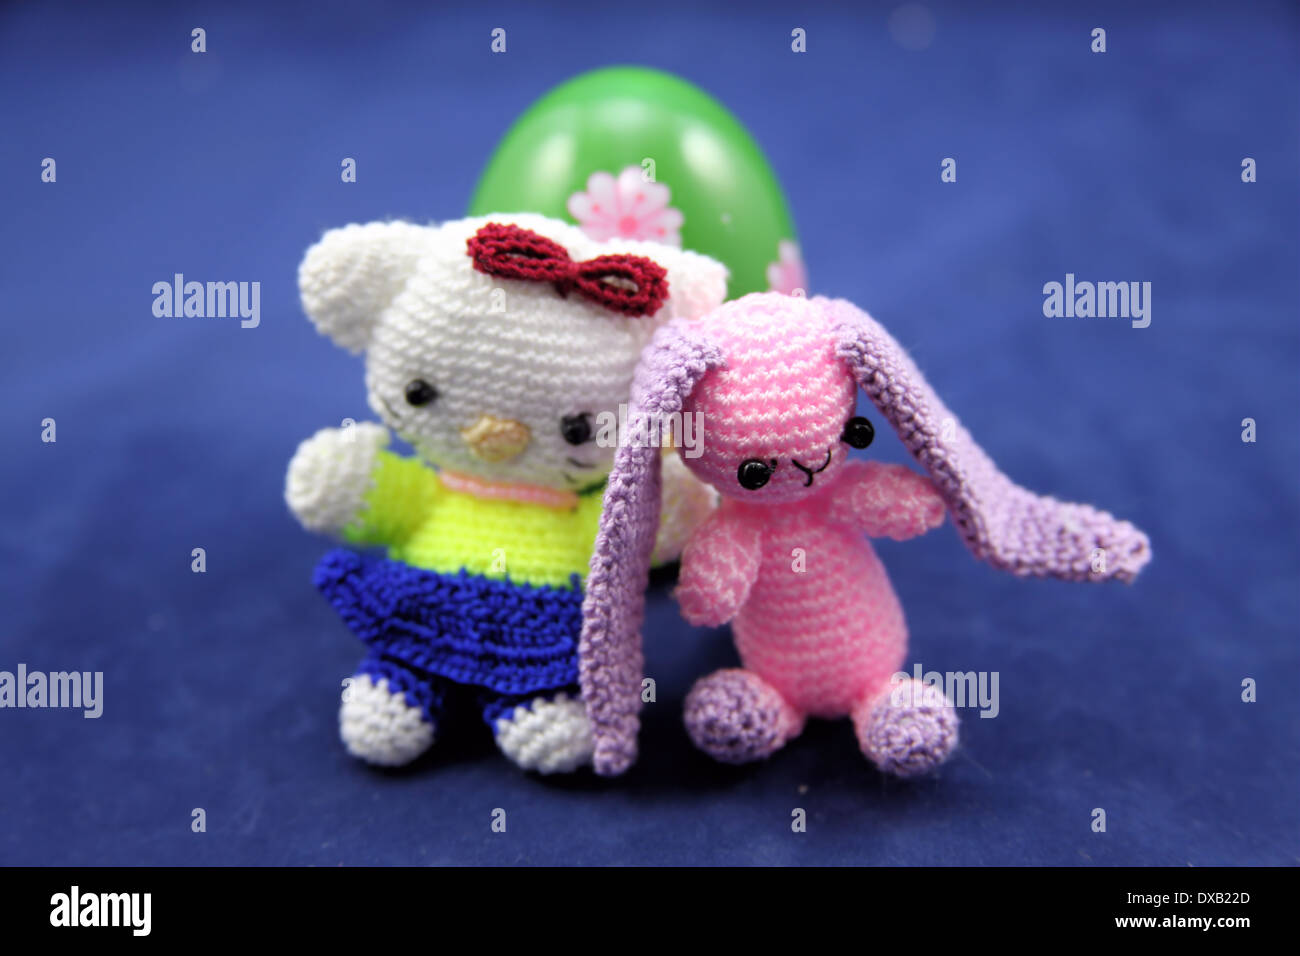 TINY ANIMALS,KNITTED,TWO INCHES HIGH Stock Photo